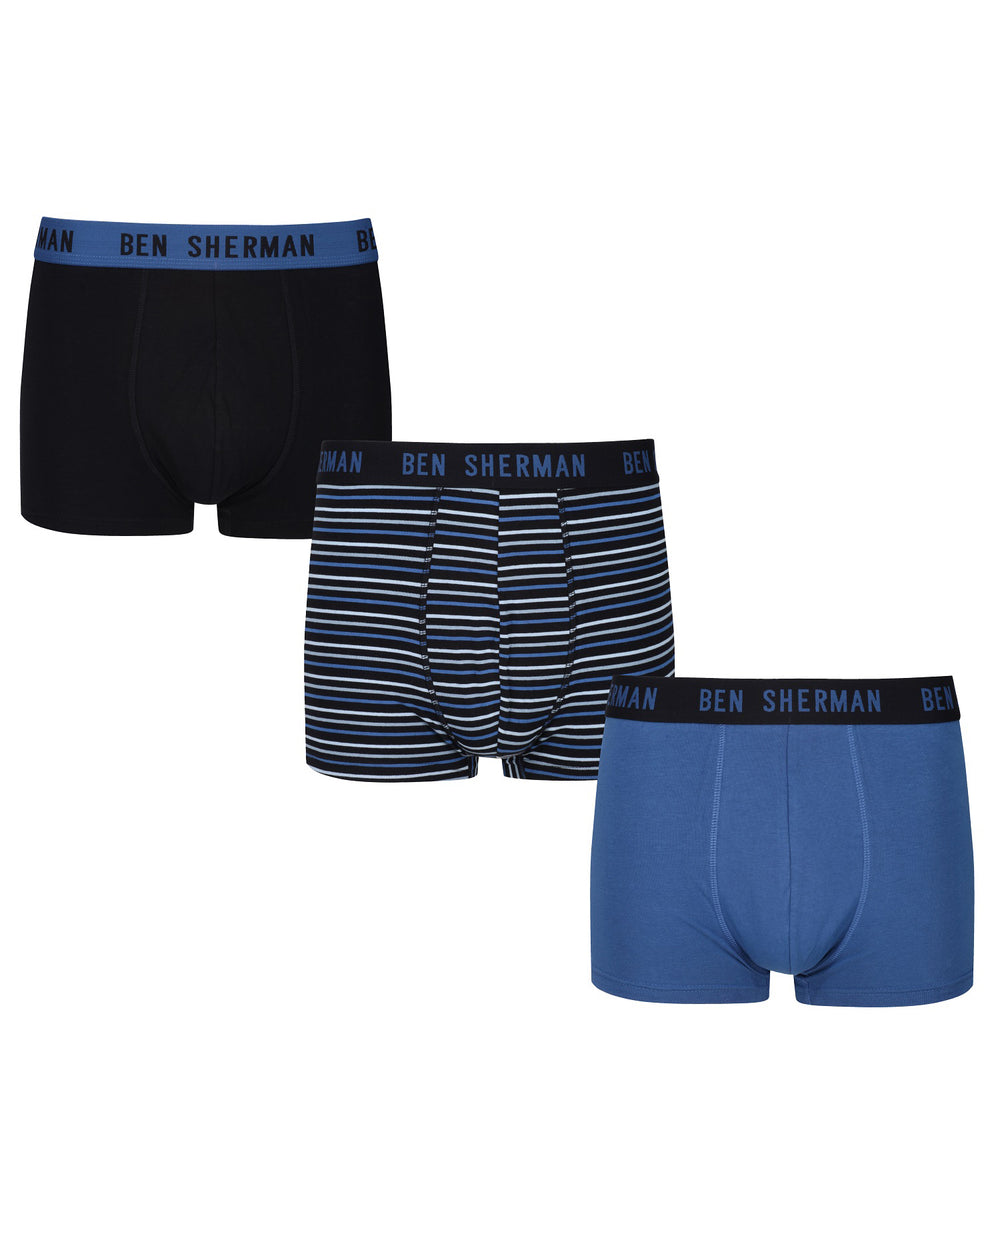 Chester Men's 3-Pack Fitted No-Fly Boxer-Briefs - Black/Blue Black Stripe/Delft